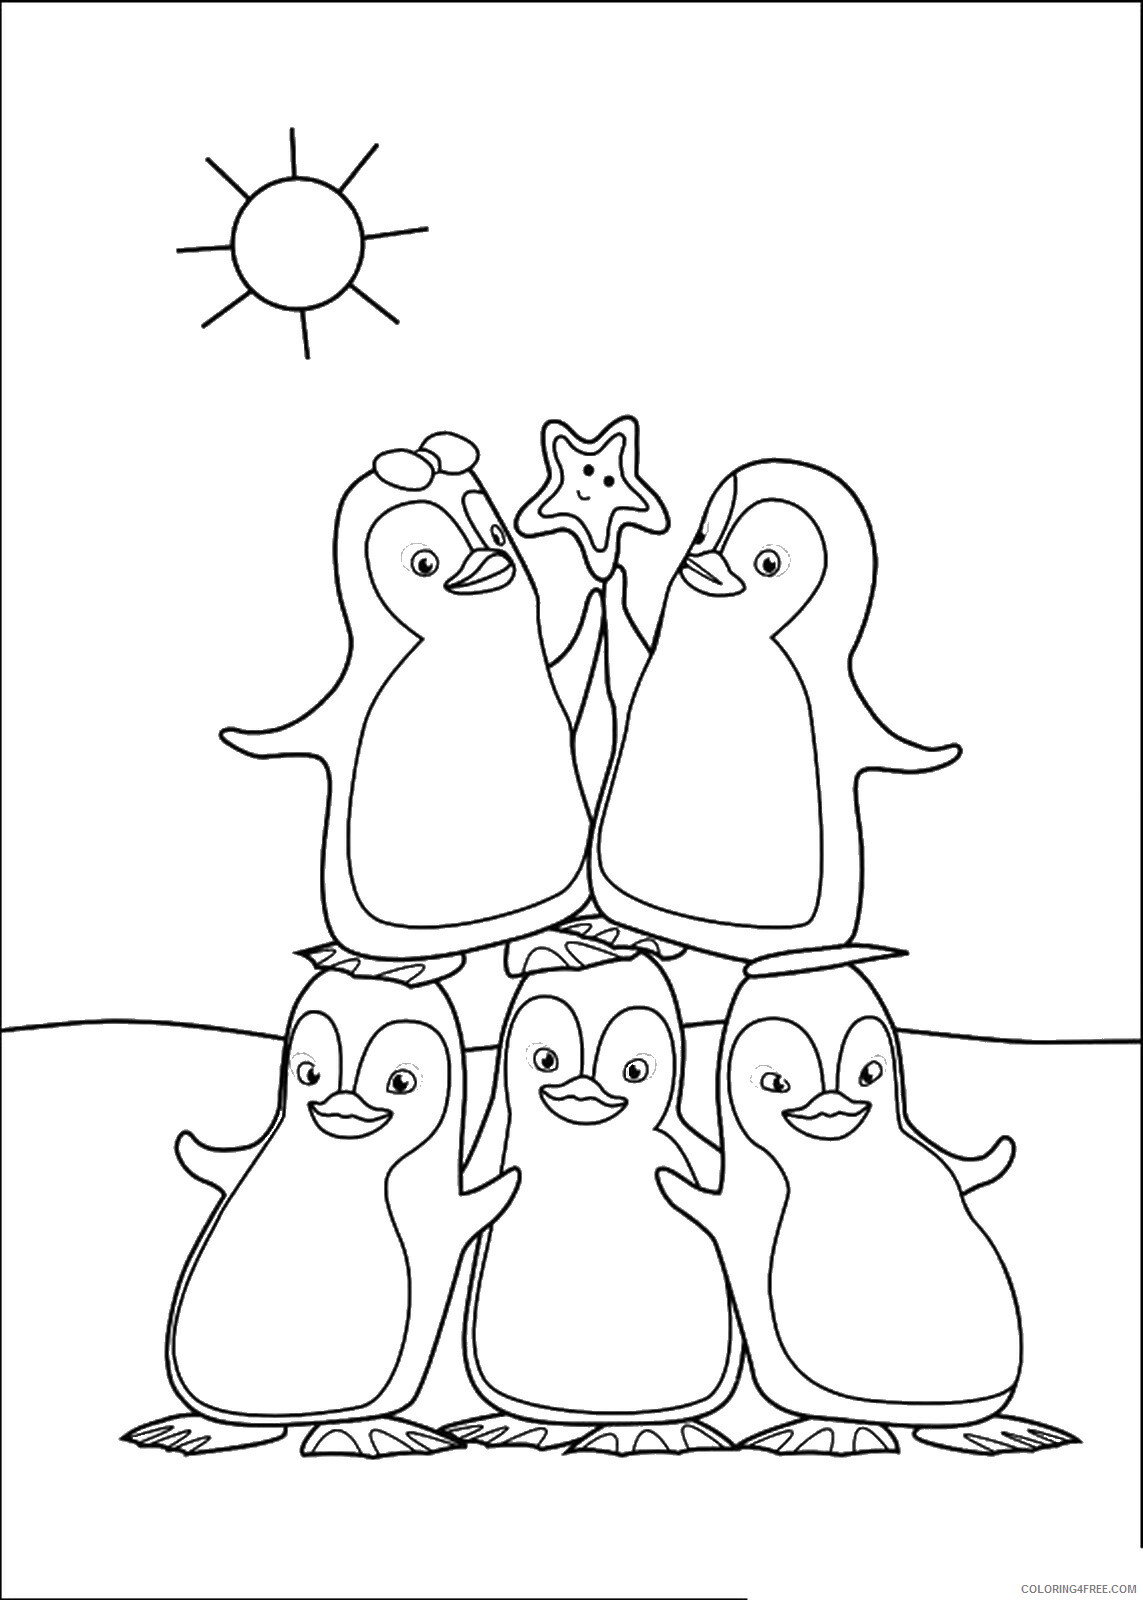 Ozie Boo Coloring Pages TV Film Ozie_Boo_cl_20 Printable 2020 05872 Coloring4free